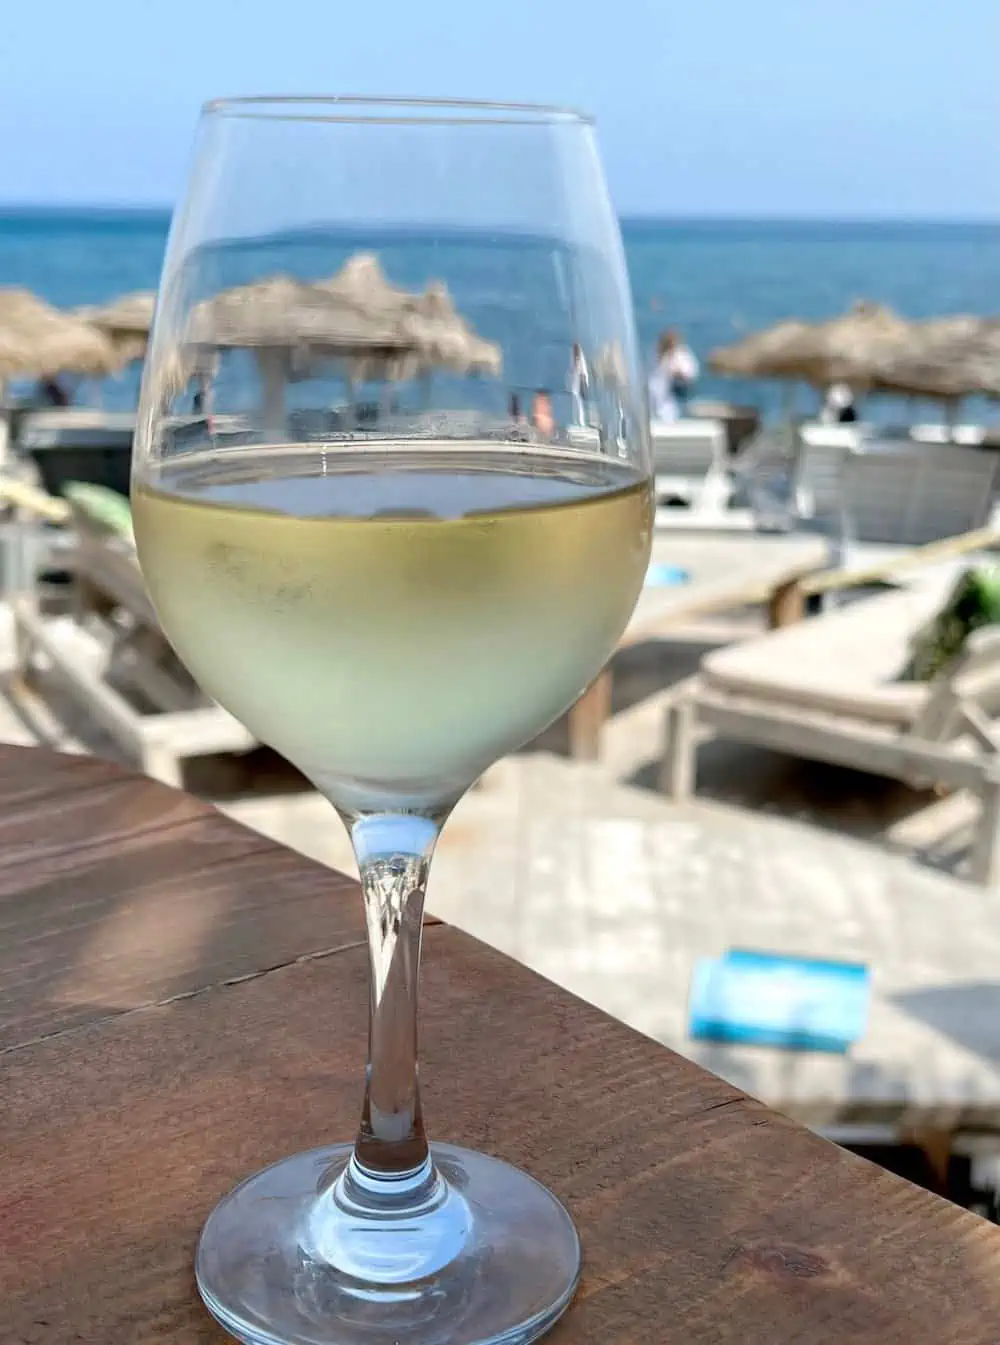 A glass of white wine at a beac in Santorini.